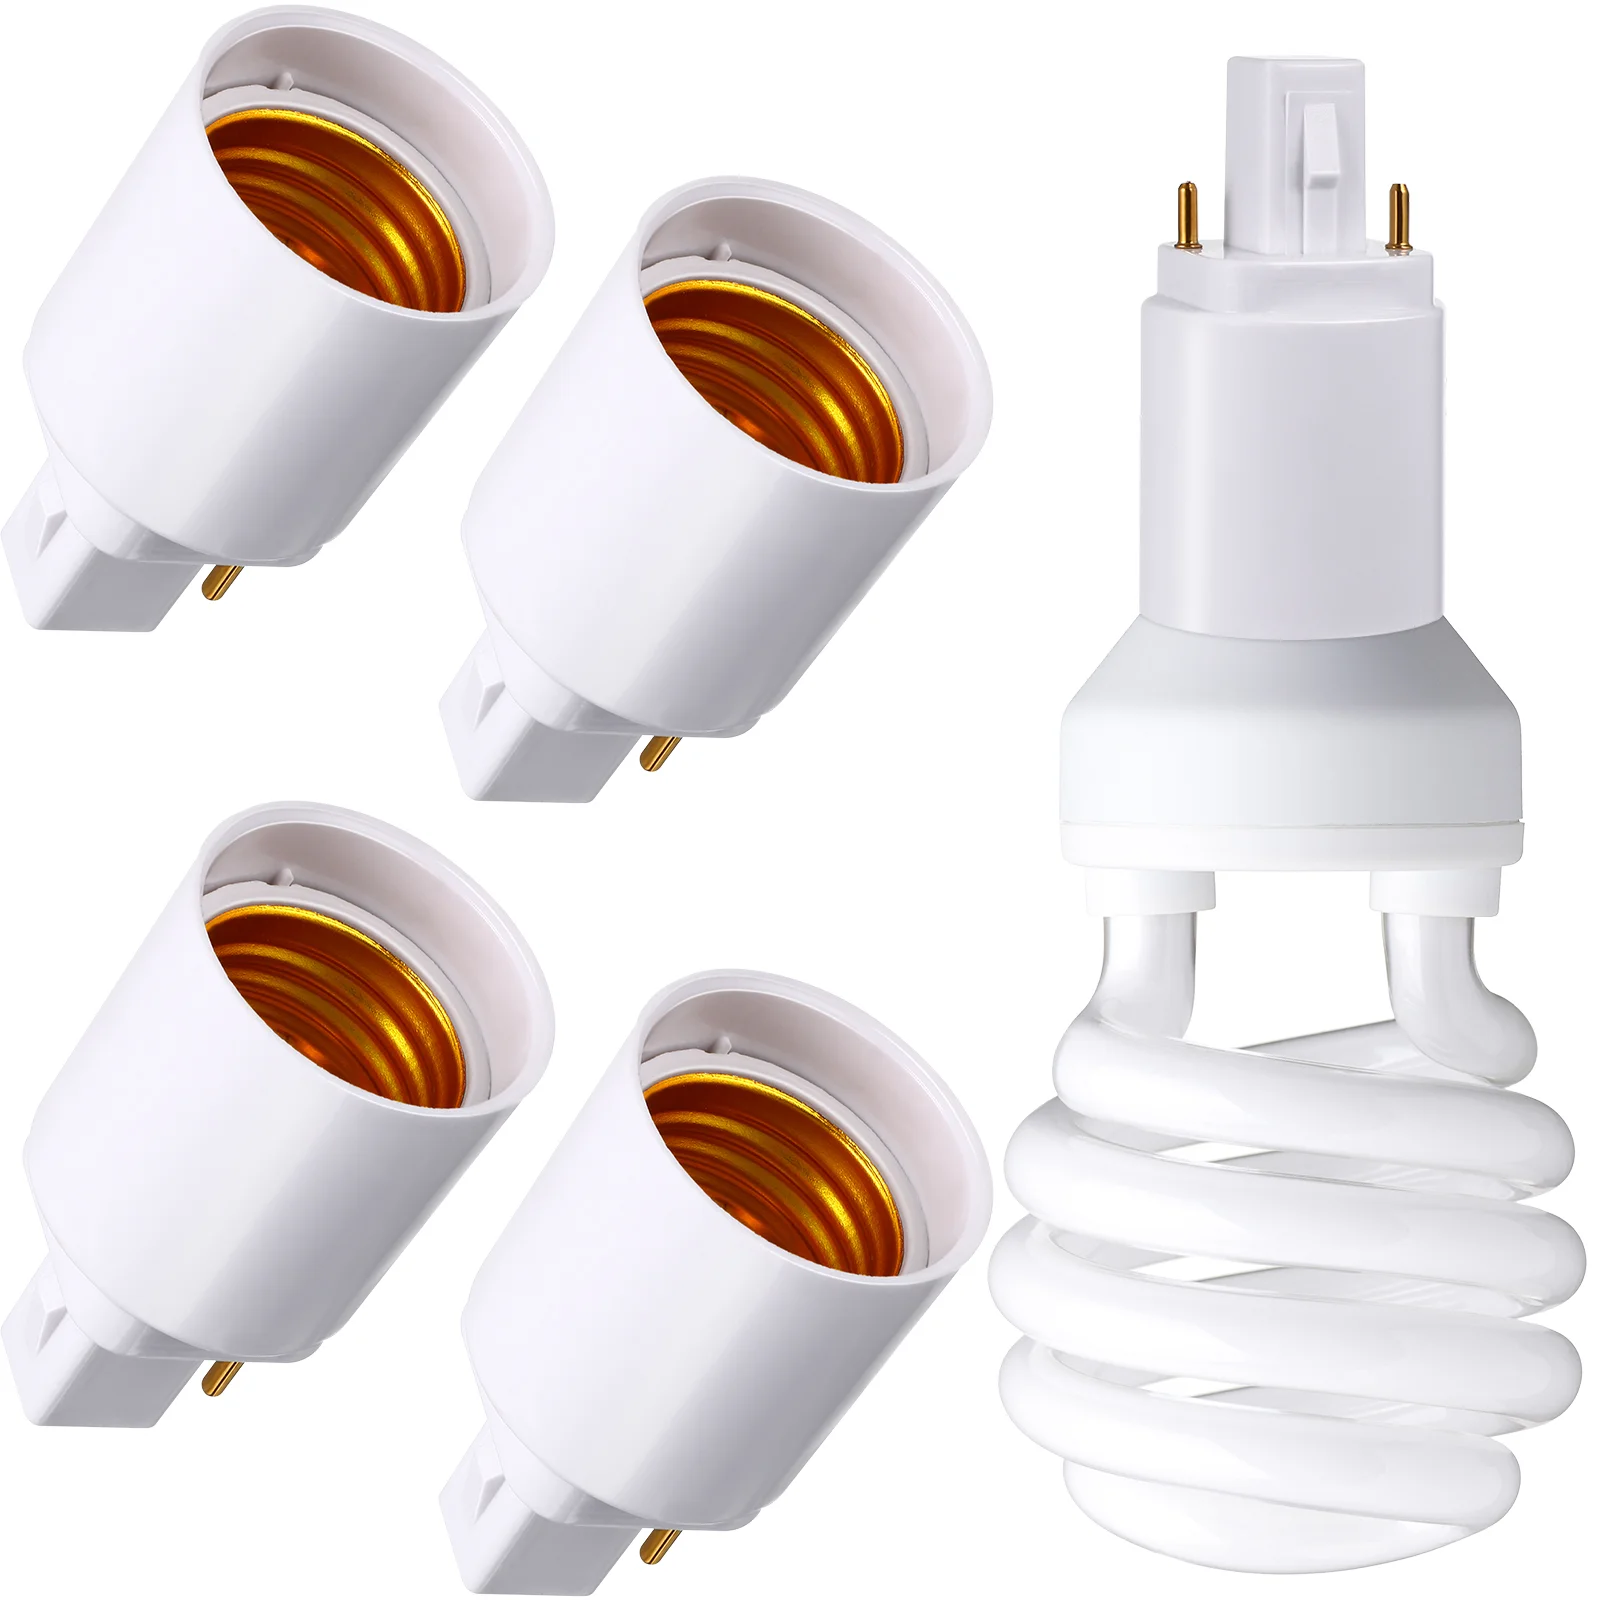 

4 Pcs G24d Conversion Lamp Head Light Bulb Adapter Electrical Switches Socket Extension Extender Product Holder